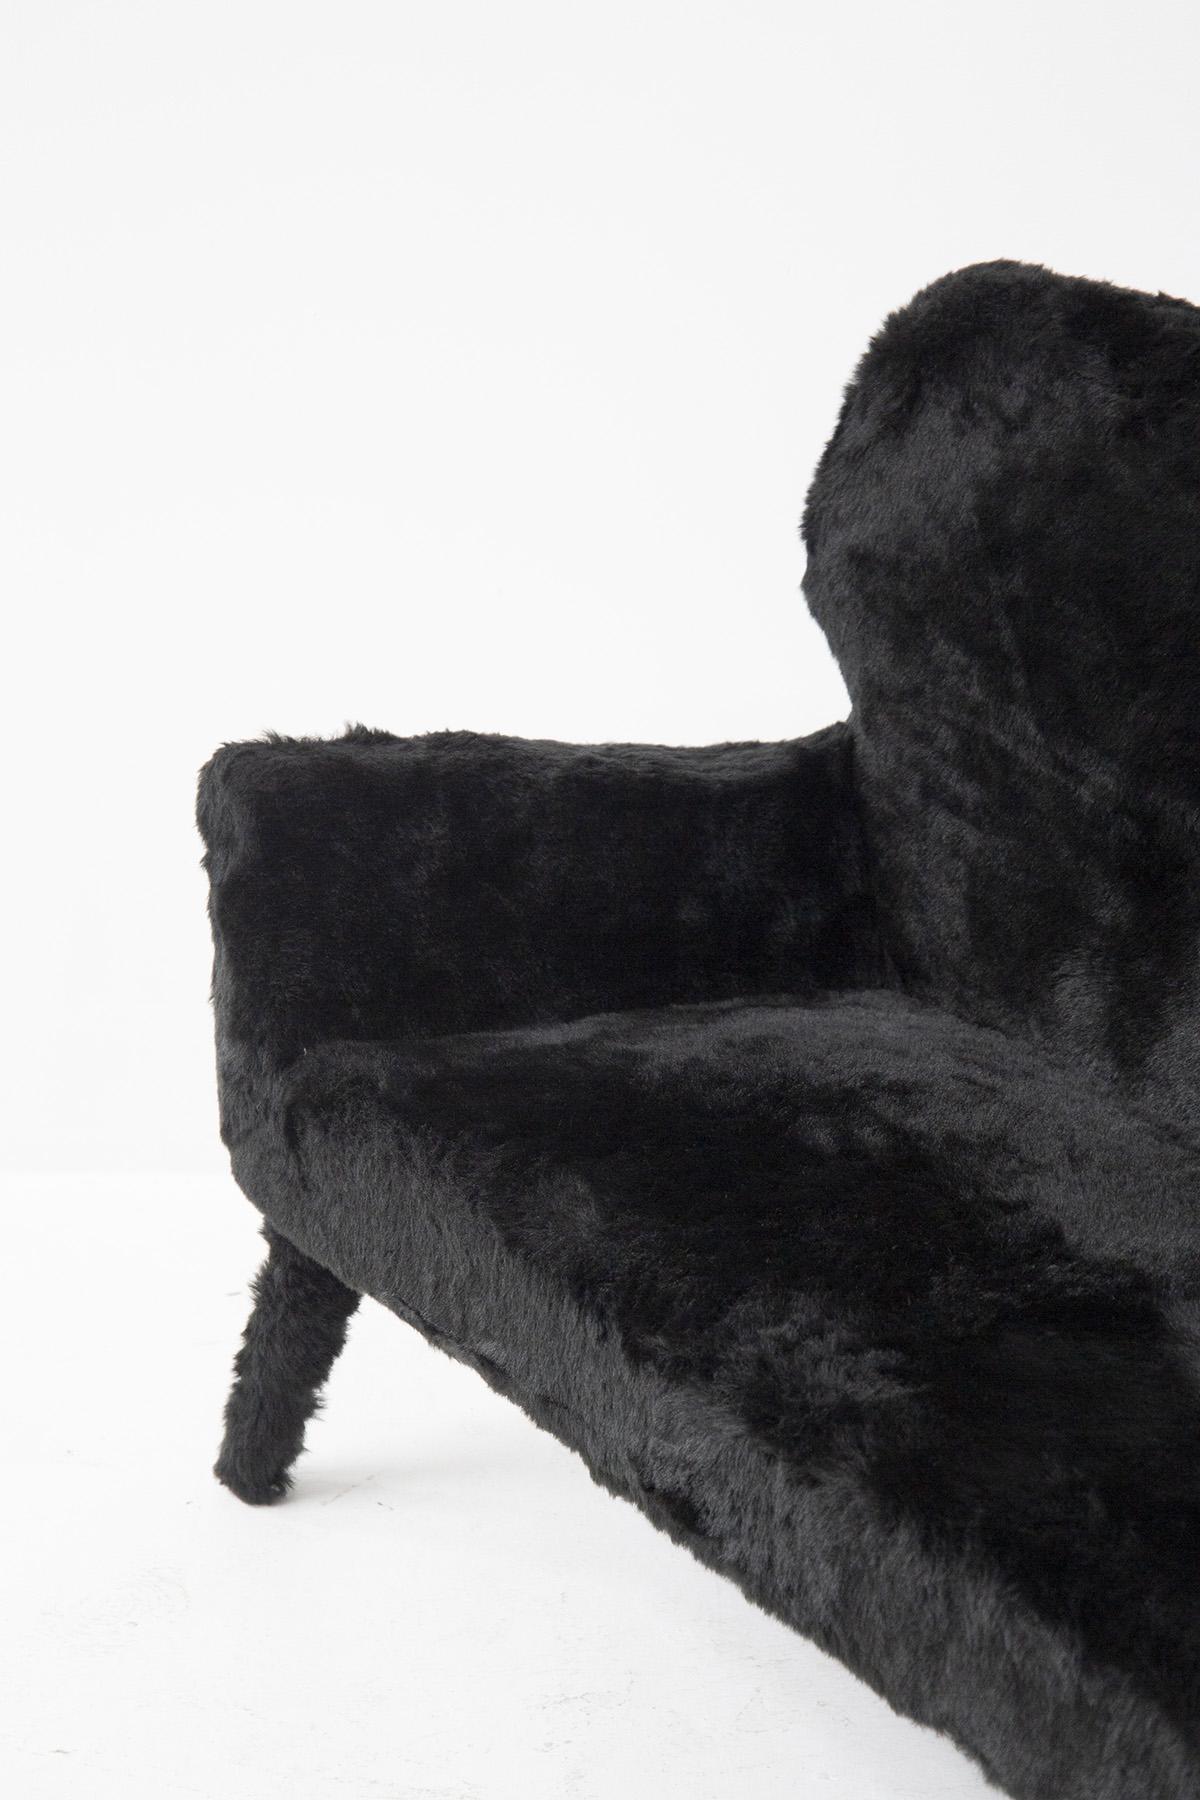 Gorgeous vintage sofa made in the 1950s, Italian manufacture.
The sofa is totally covered in black faux fur, very whimsical.
The shapes are very simple and sinuous. There are 4 feet for support also covered in fur. The armrests create a gentle